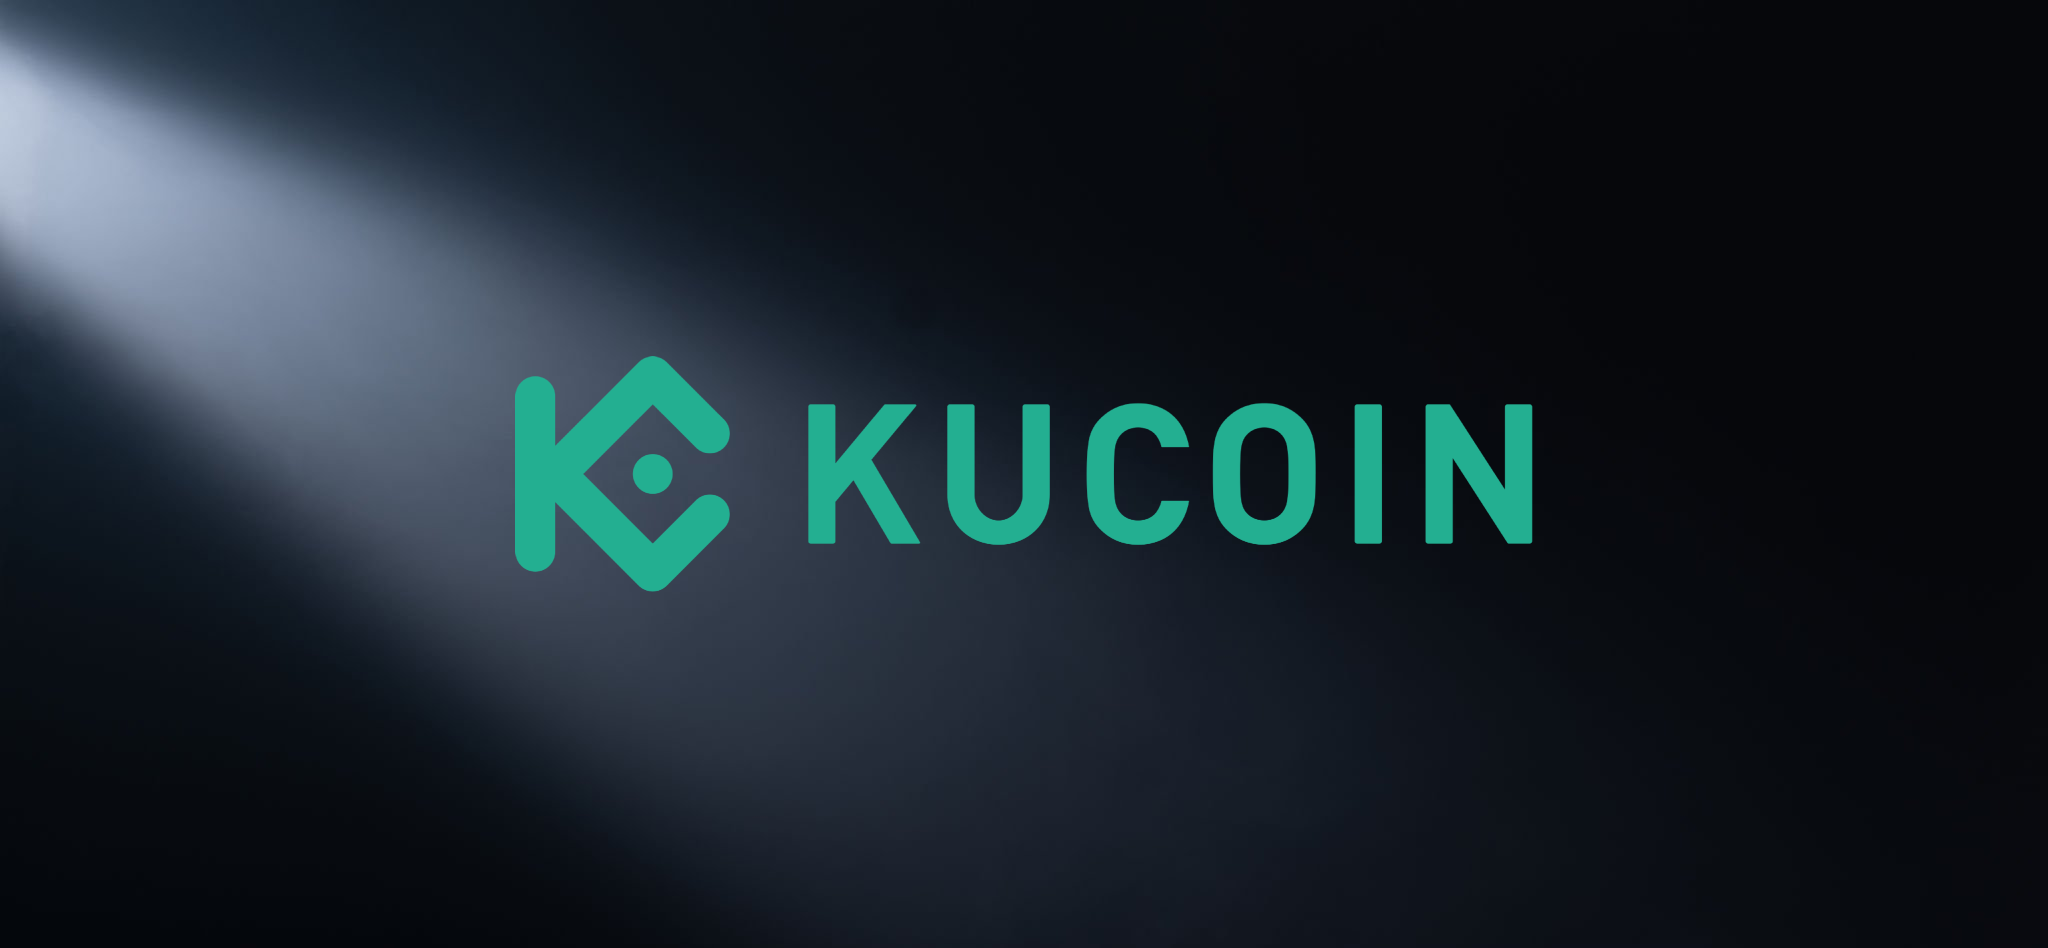 U.S prosecutors have unveiled charges accusing major cryptocurrency exchange KuCoin of willfully violating anti-money laundering laws in a $9 billion scheme.